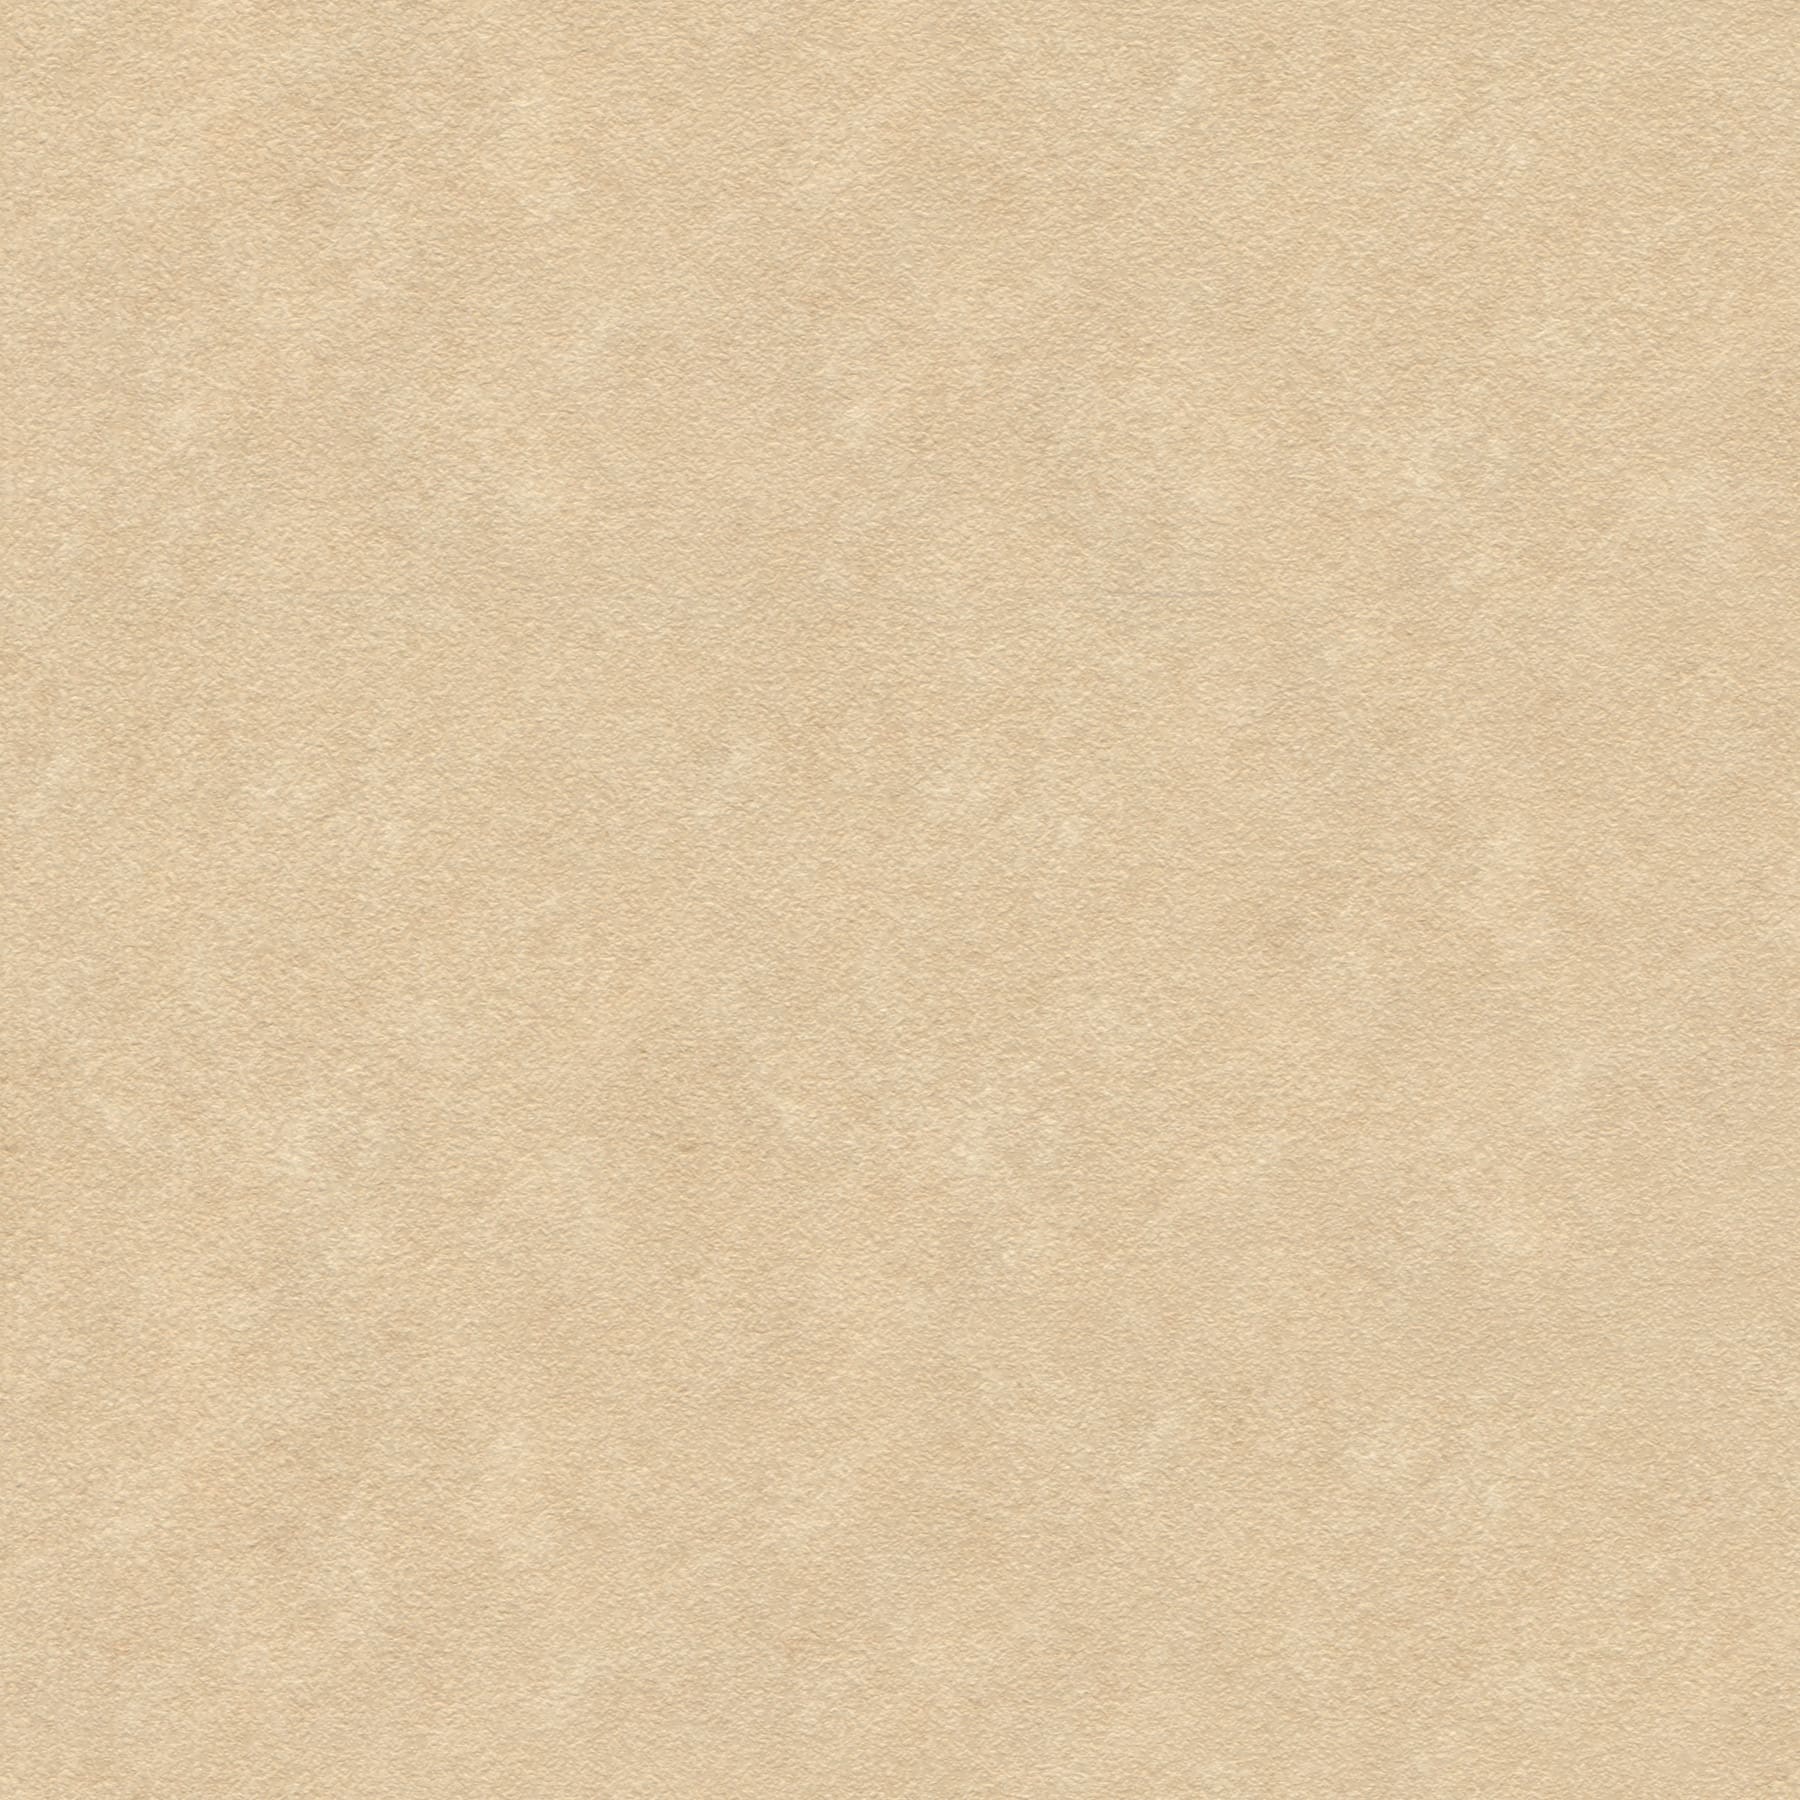 Buy the Sand Felt Parchment Paper by Recollections® at Michaels